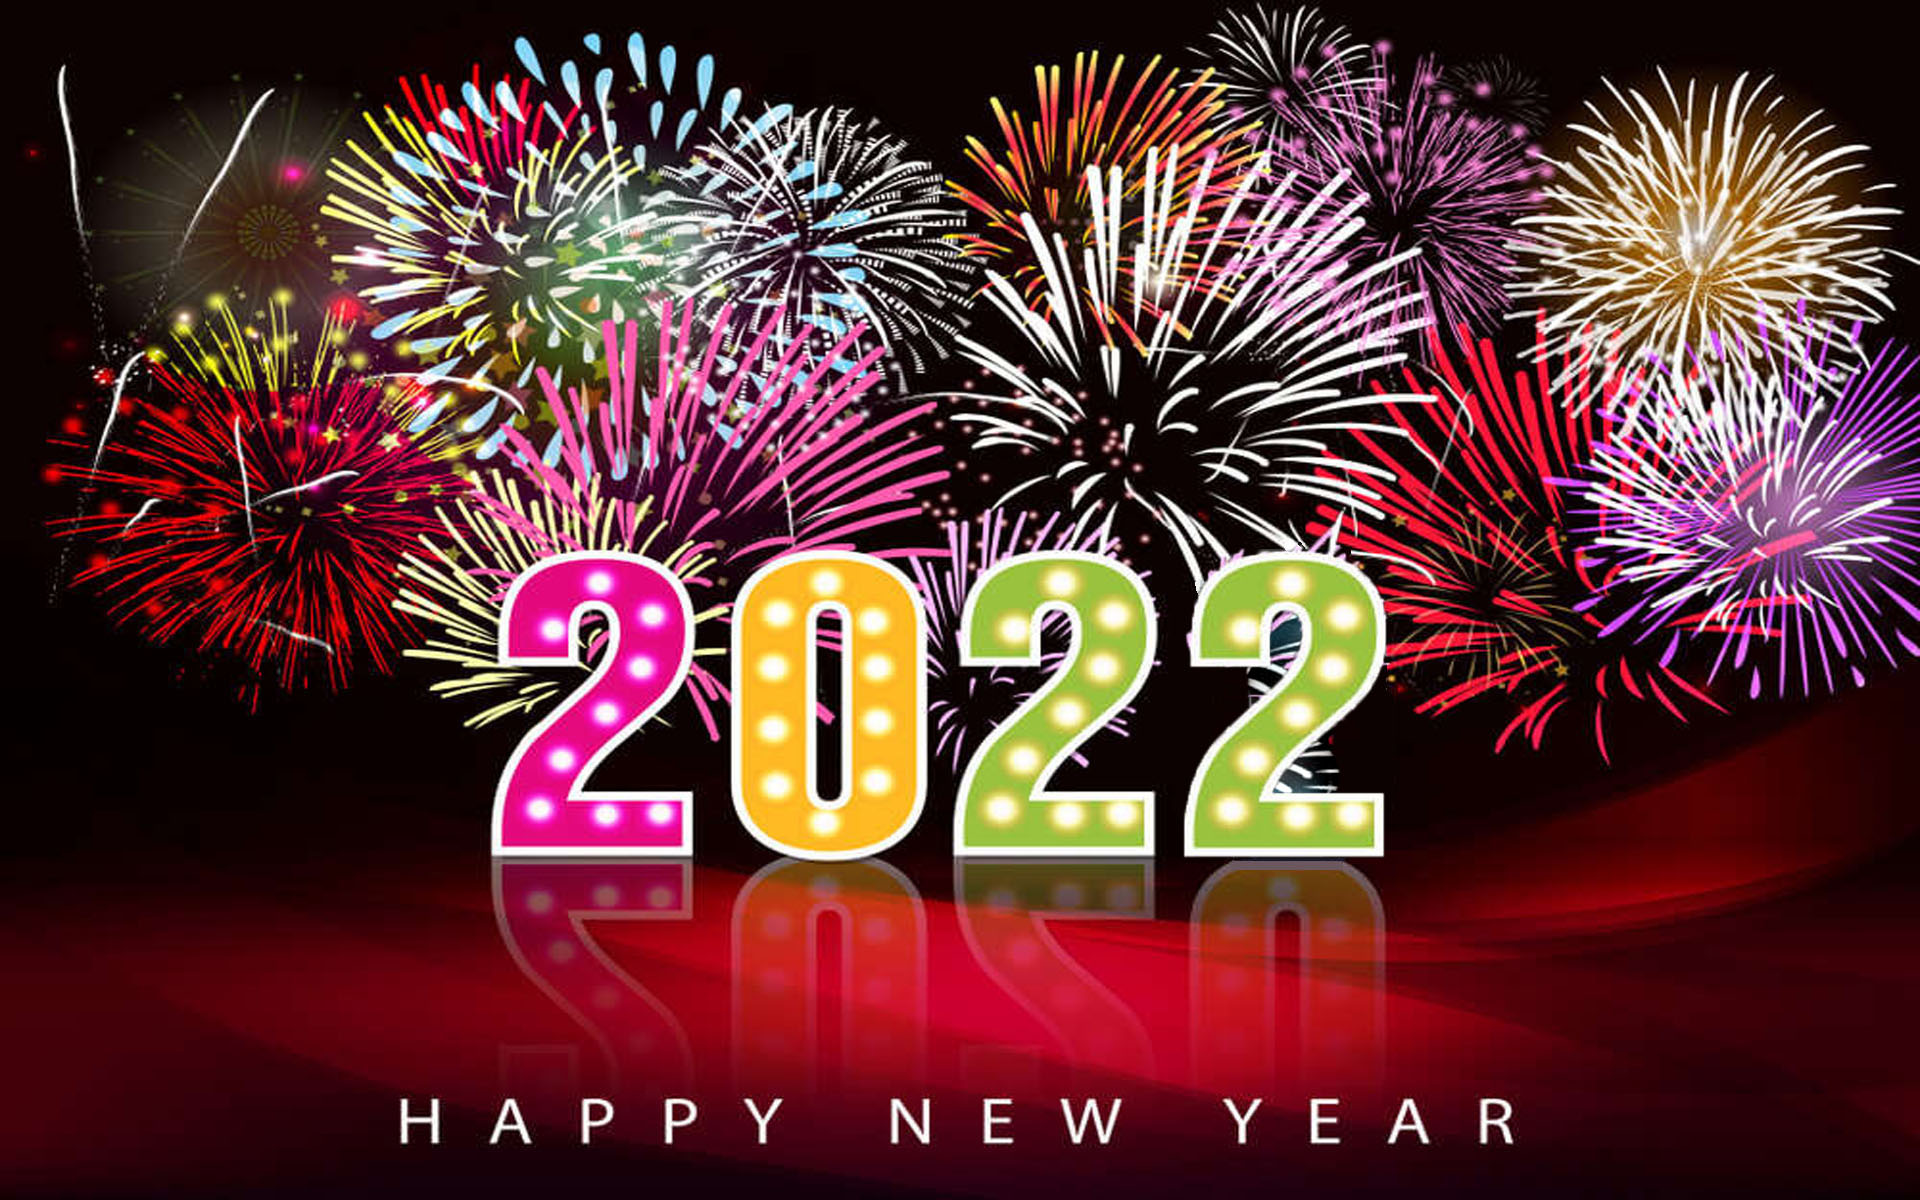 Greeting For New Year's Eve 2022 Fireworks In Night HD Wallpaper, Wallpaper13.com